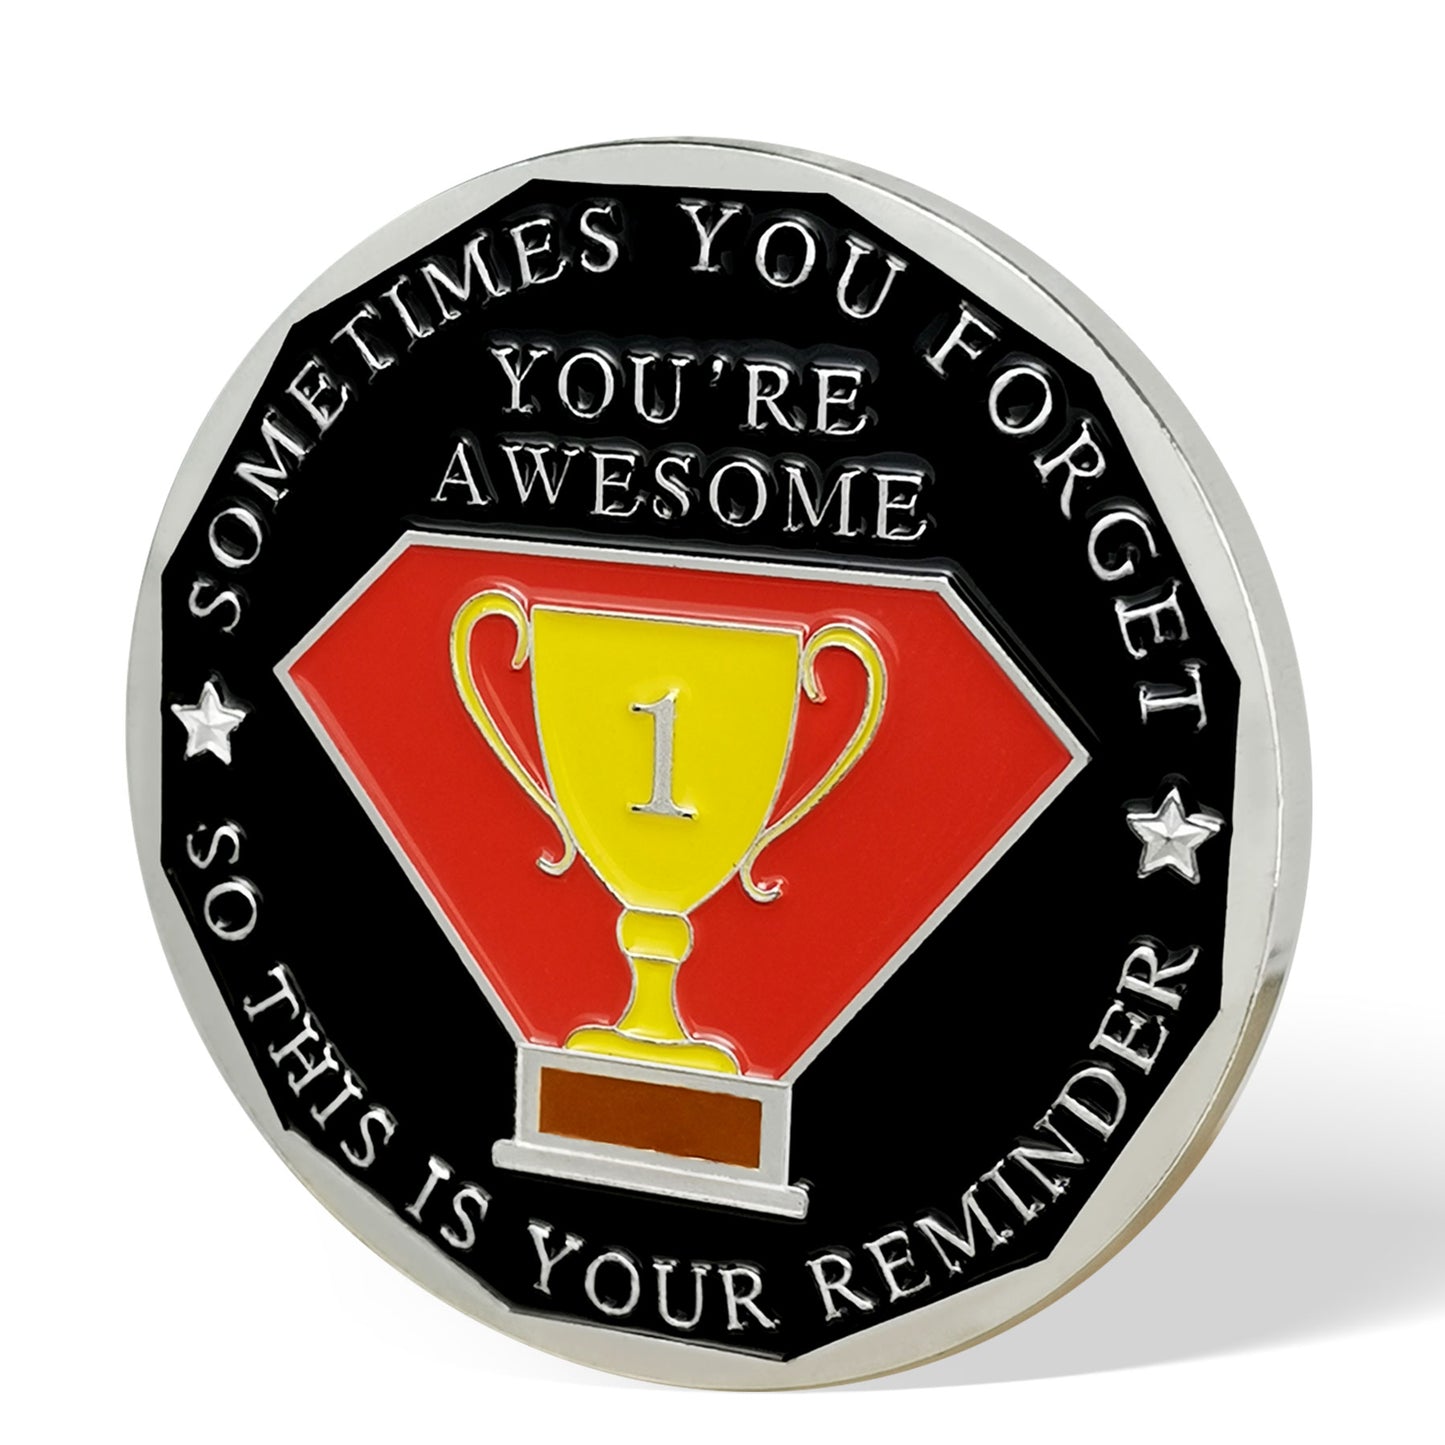 Encouragement Challenge Coin-Employee Appreciation Gifts Inspirational Thank You Coin for Students and Cowokers-Dedication in Leadership